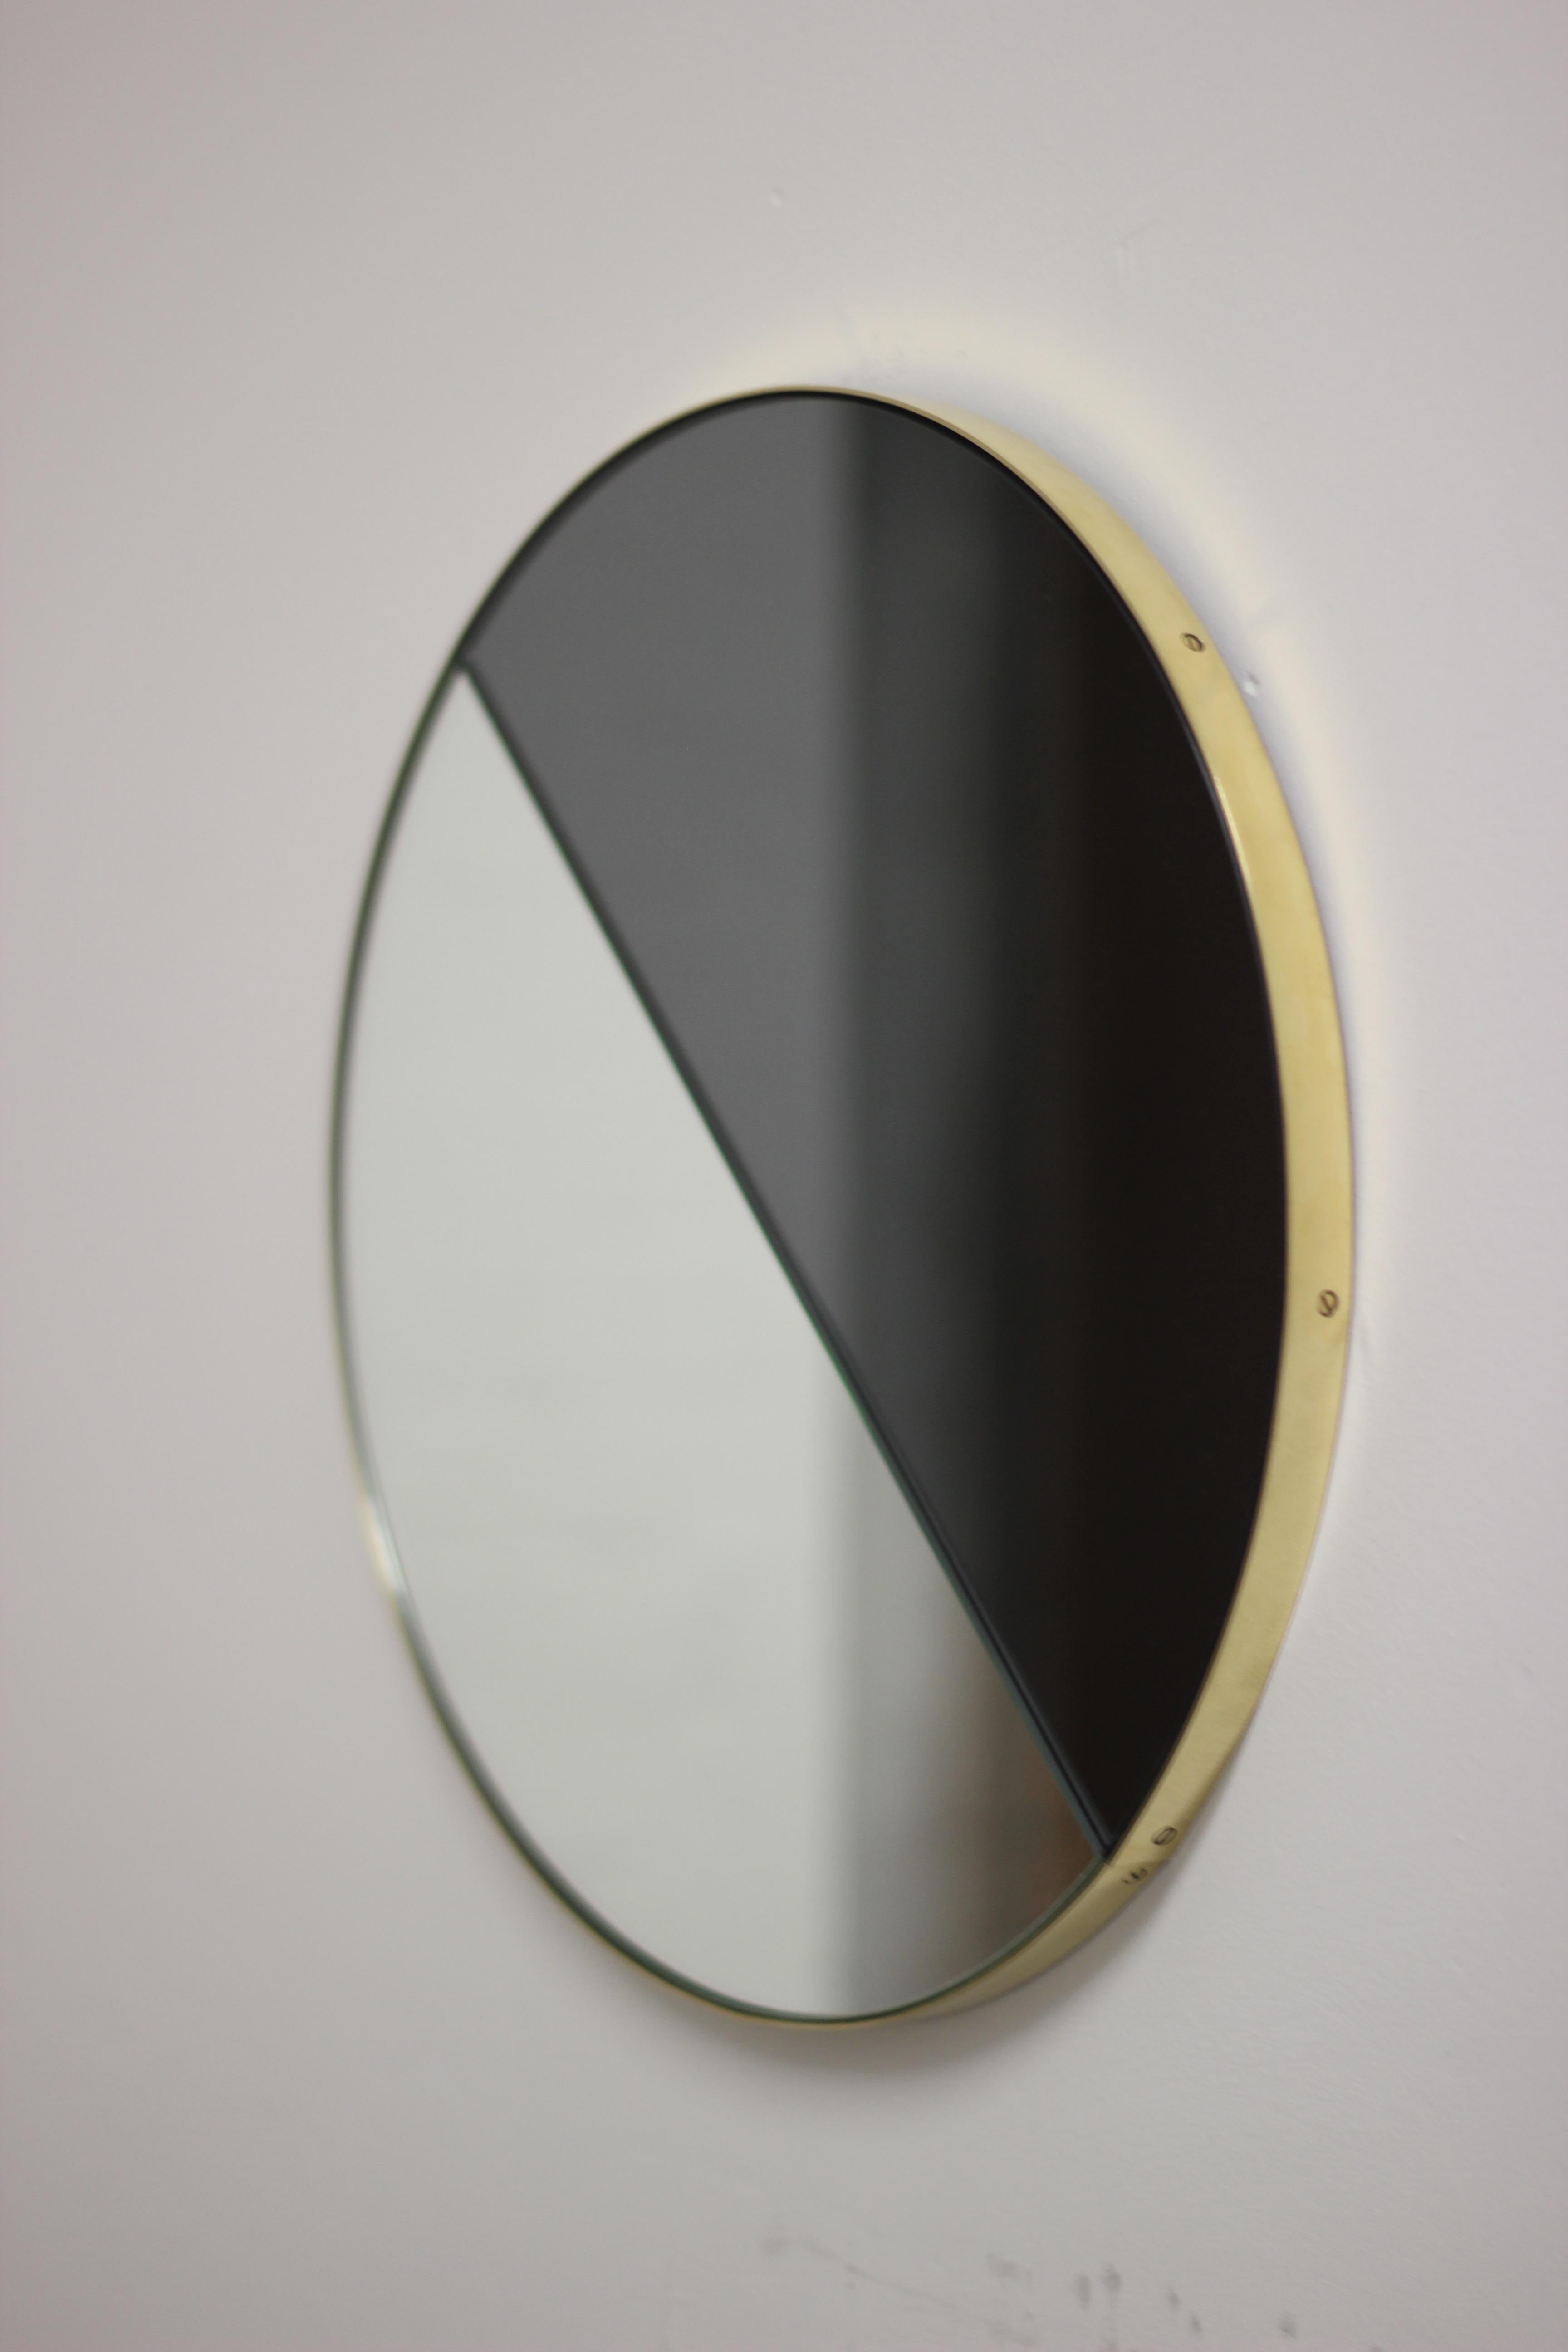 Modern Orbis Dualis Mixed Tint Contemporary Round Mirror with Brass Frame, XL For Sale